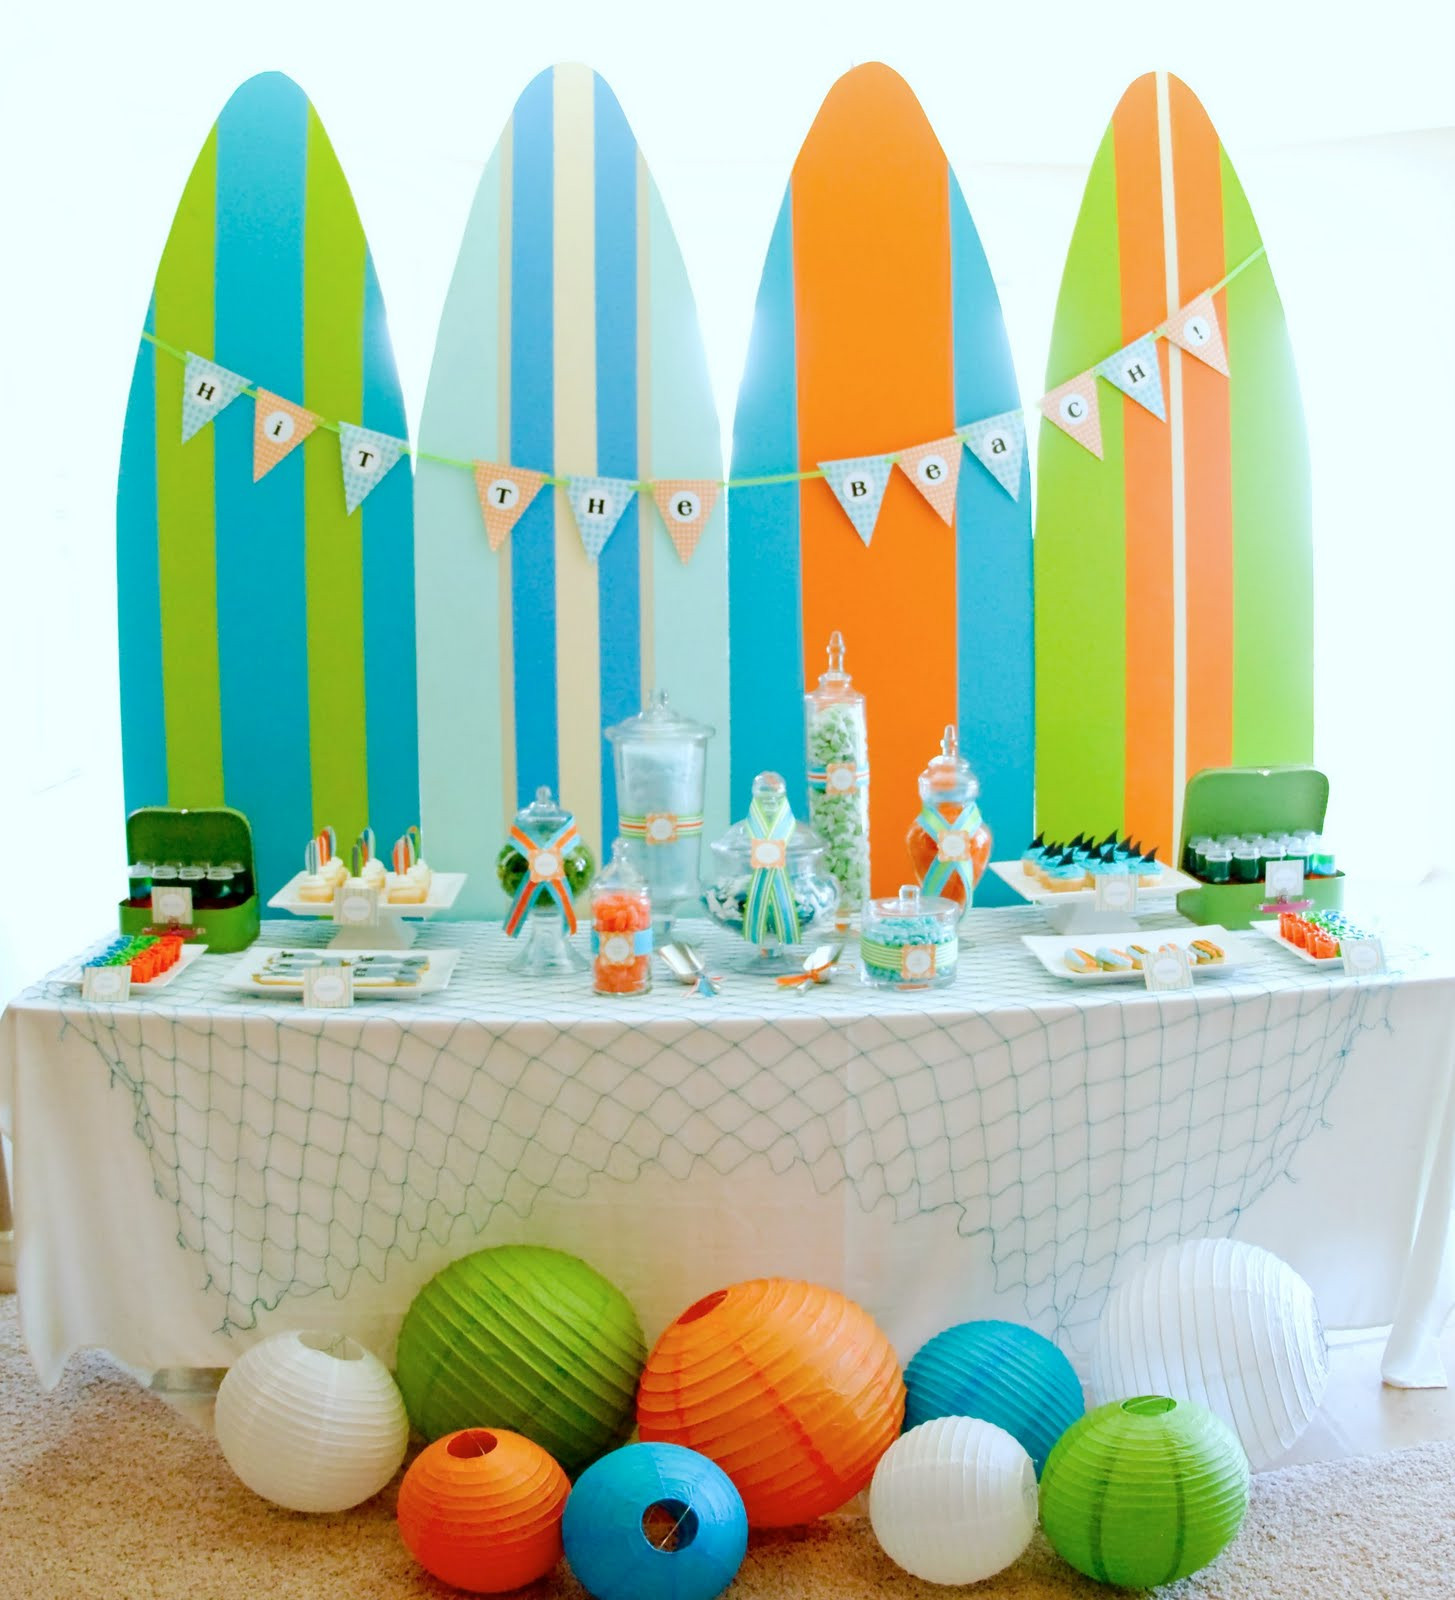 Ideas For A Beach Theme Party
 Kara s Party Ideas Surf s Up Summer Pool Party